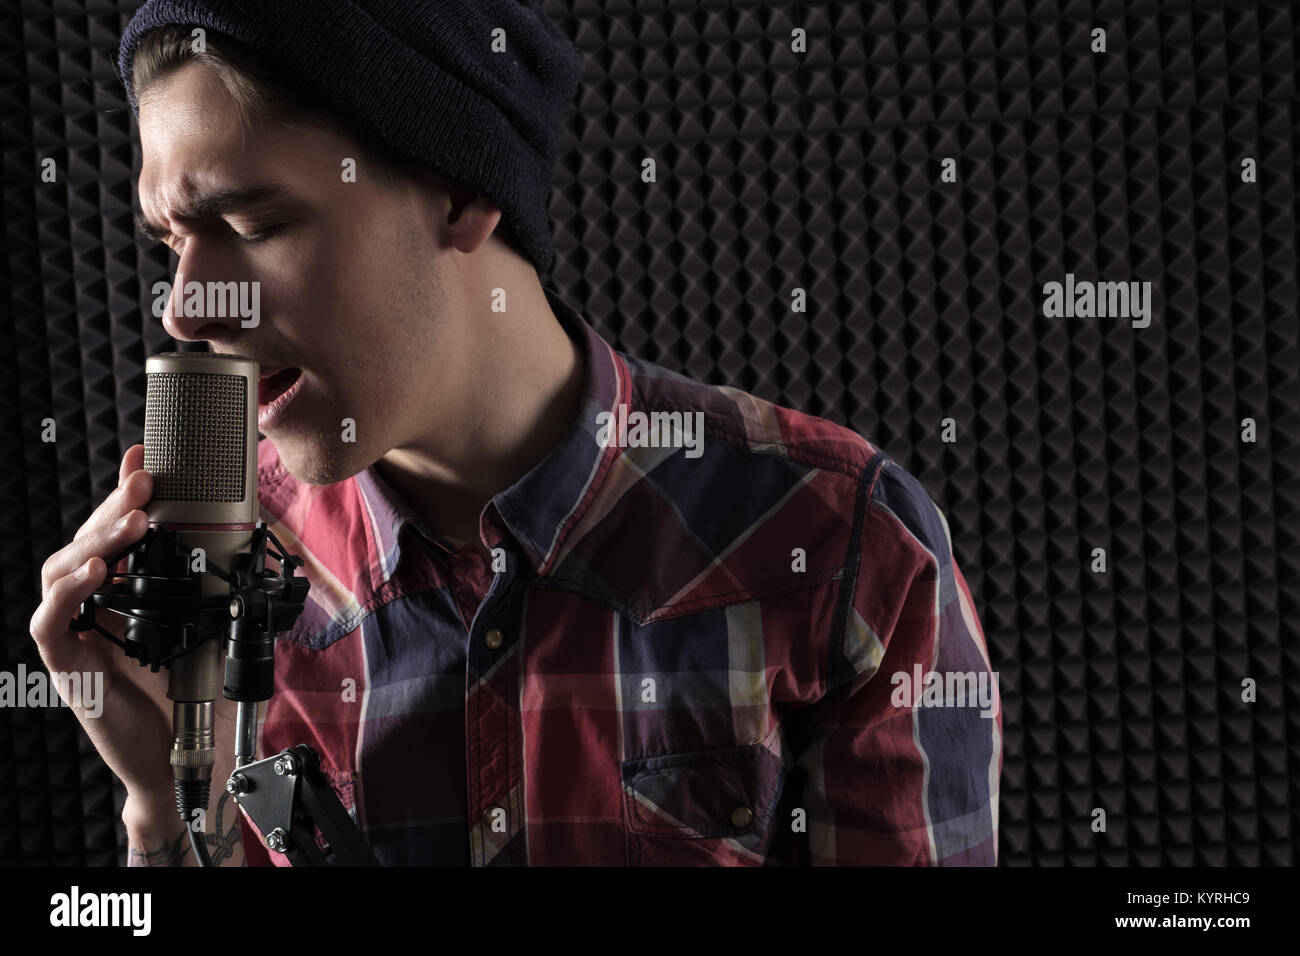 Close-up portrait of emotional young guy singing with his eyes closed and his brow in a knit in a cap standing in front of the microphone stand holdin Stock Photo